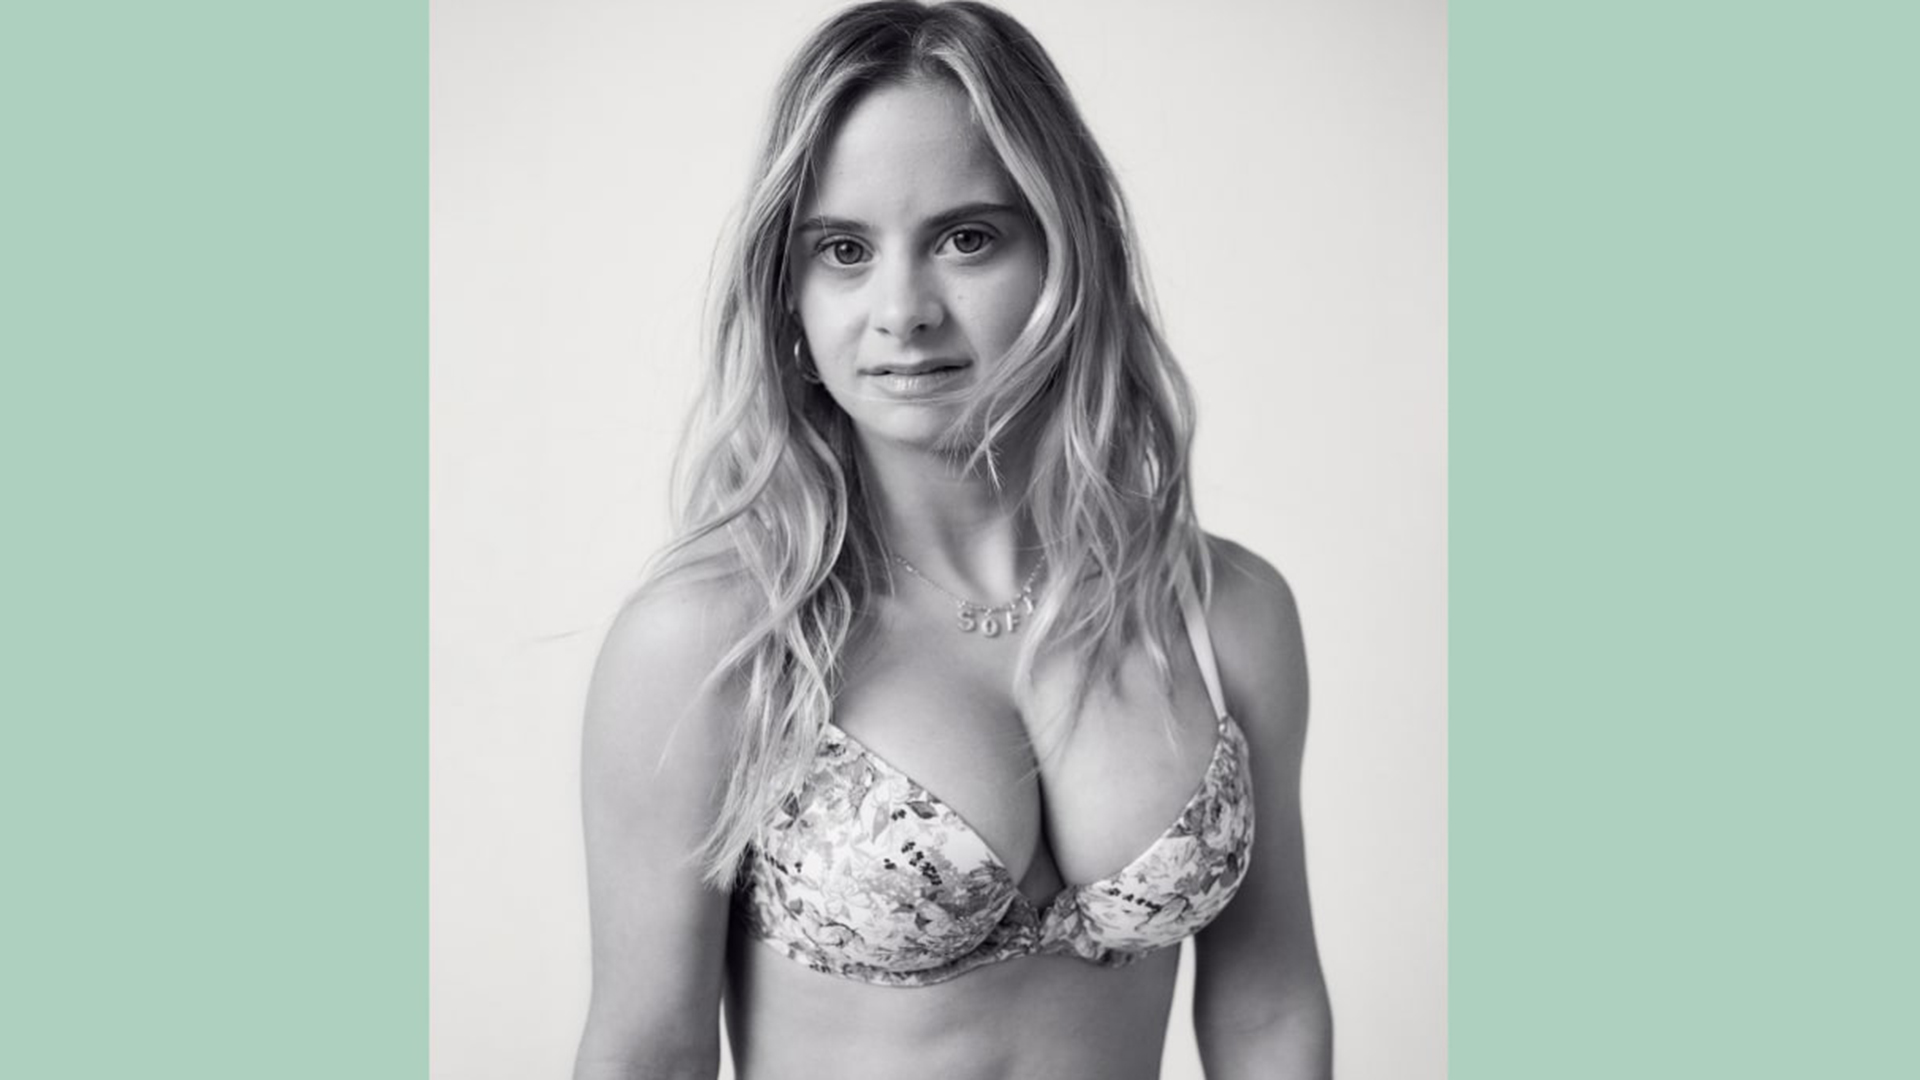 Victoria's Secret Is Making Big Changes With New Love Cloud Line